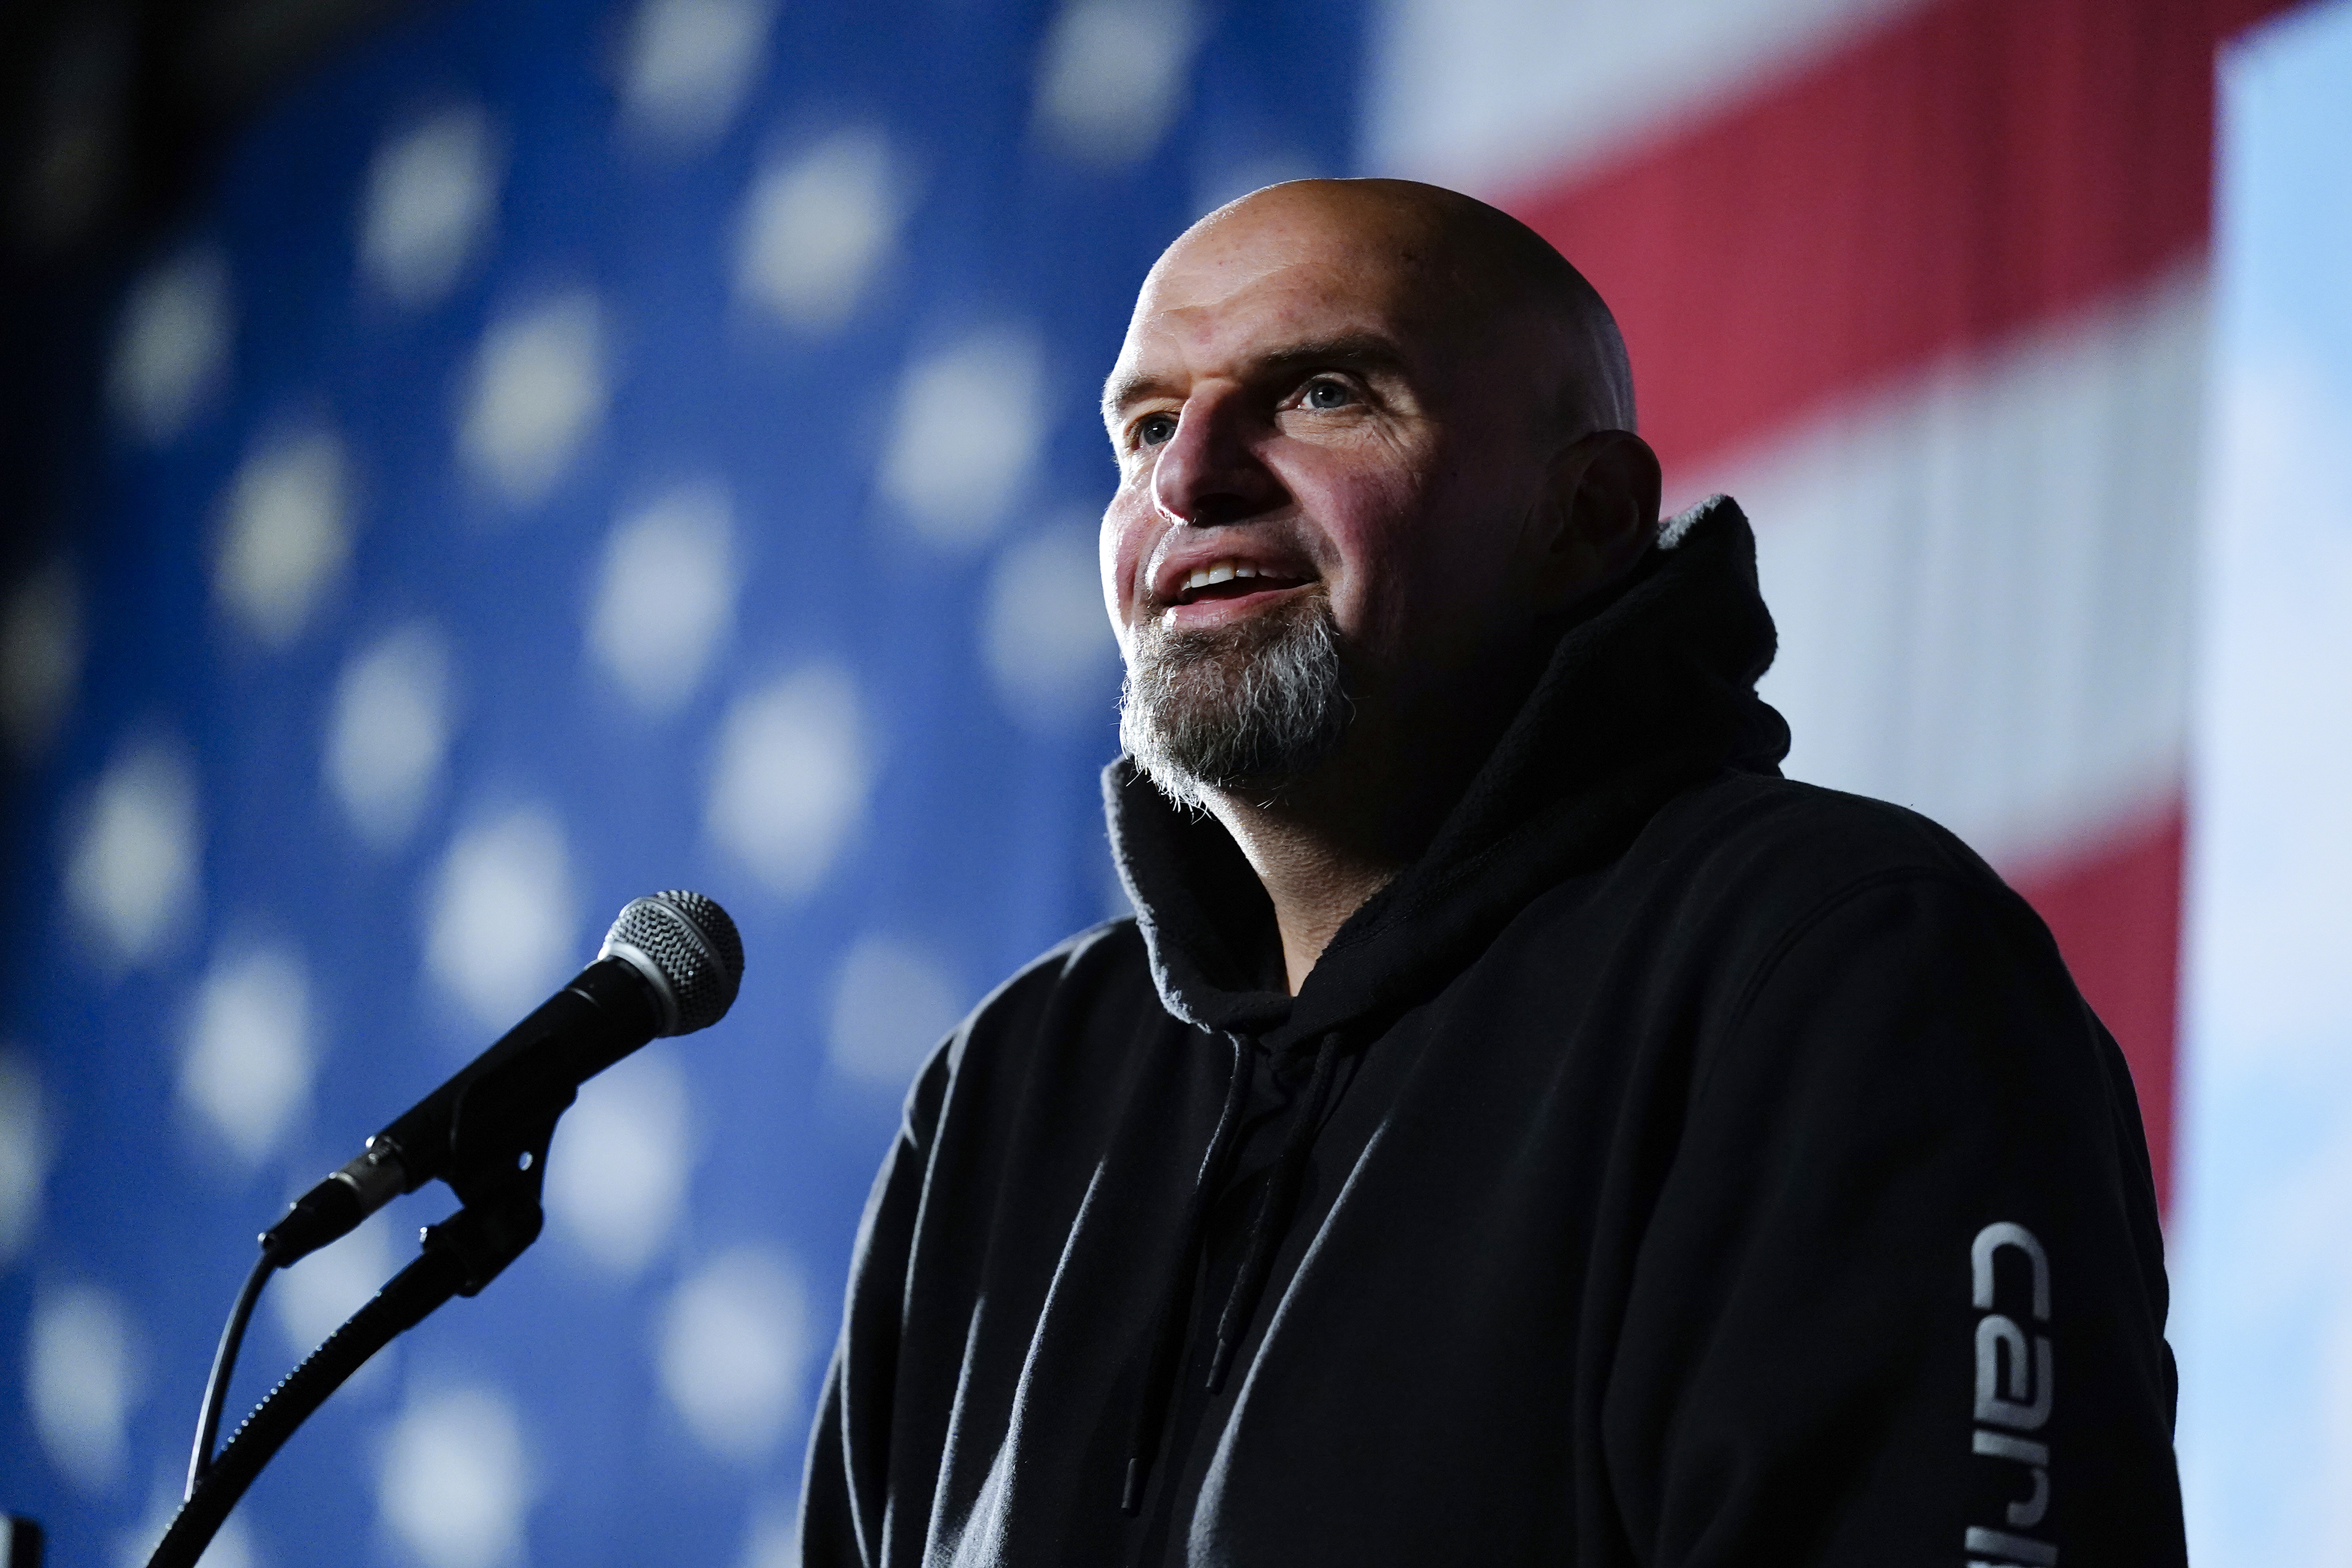 John Fetterman speaks into a microphone on a stage, wearing a black hoodie and smiling as he talks. Behind him is a large projection of the US flag.